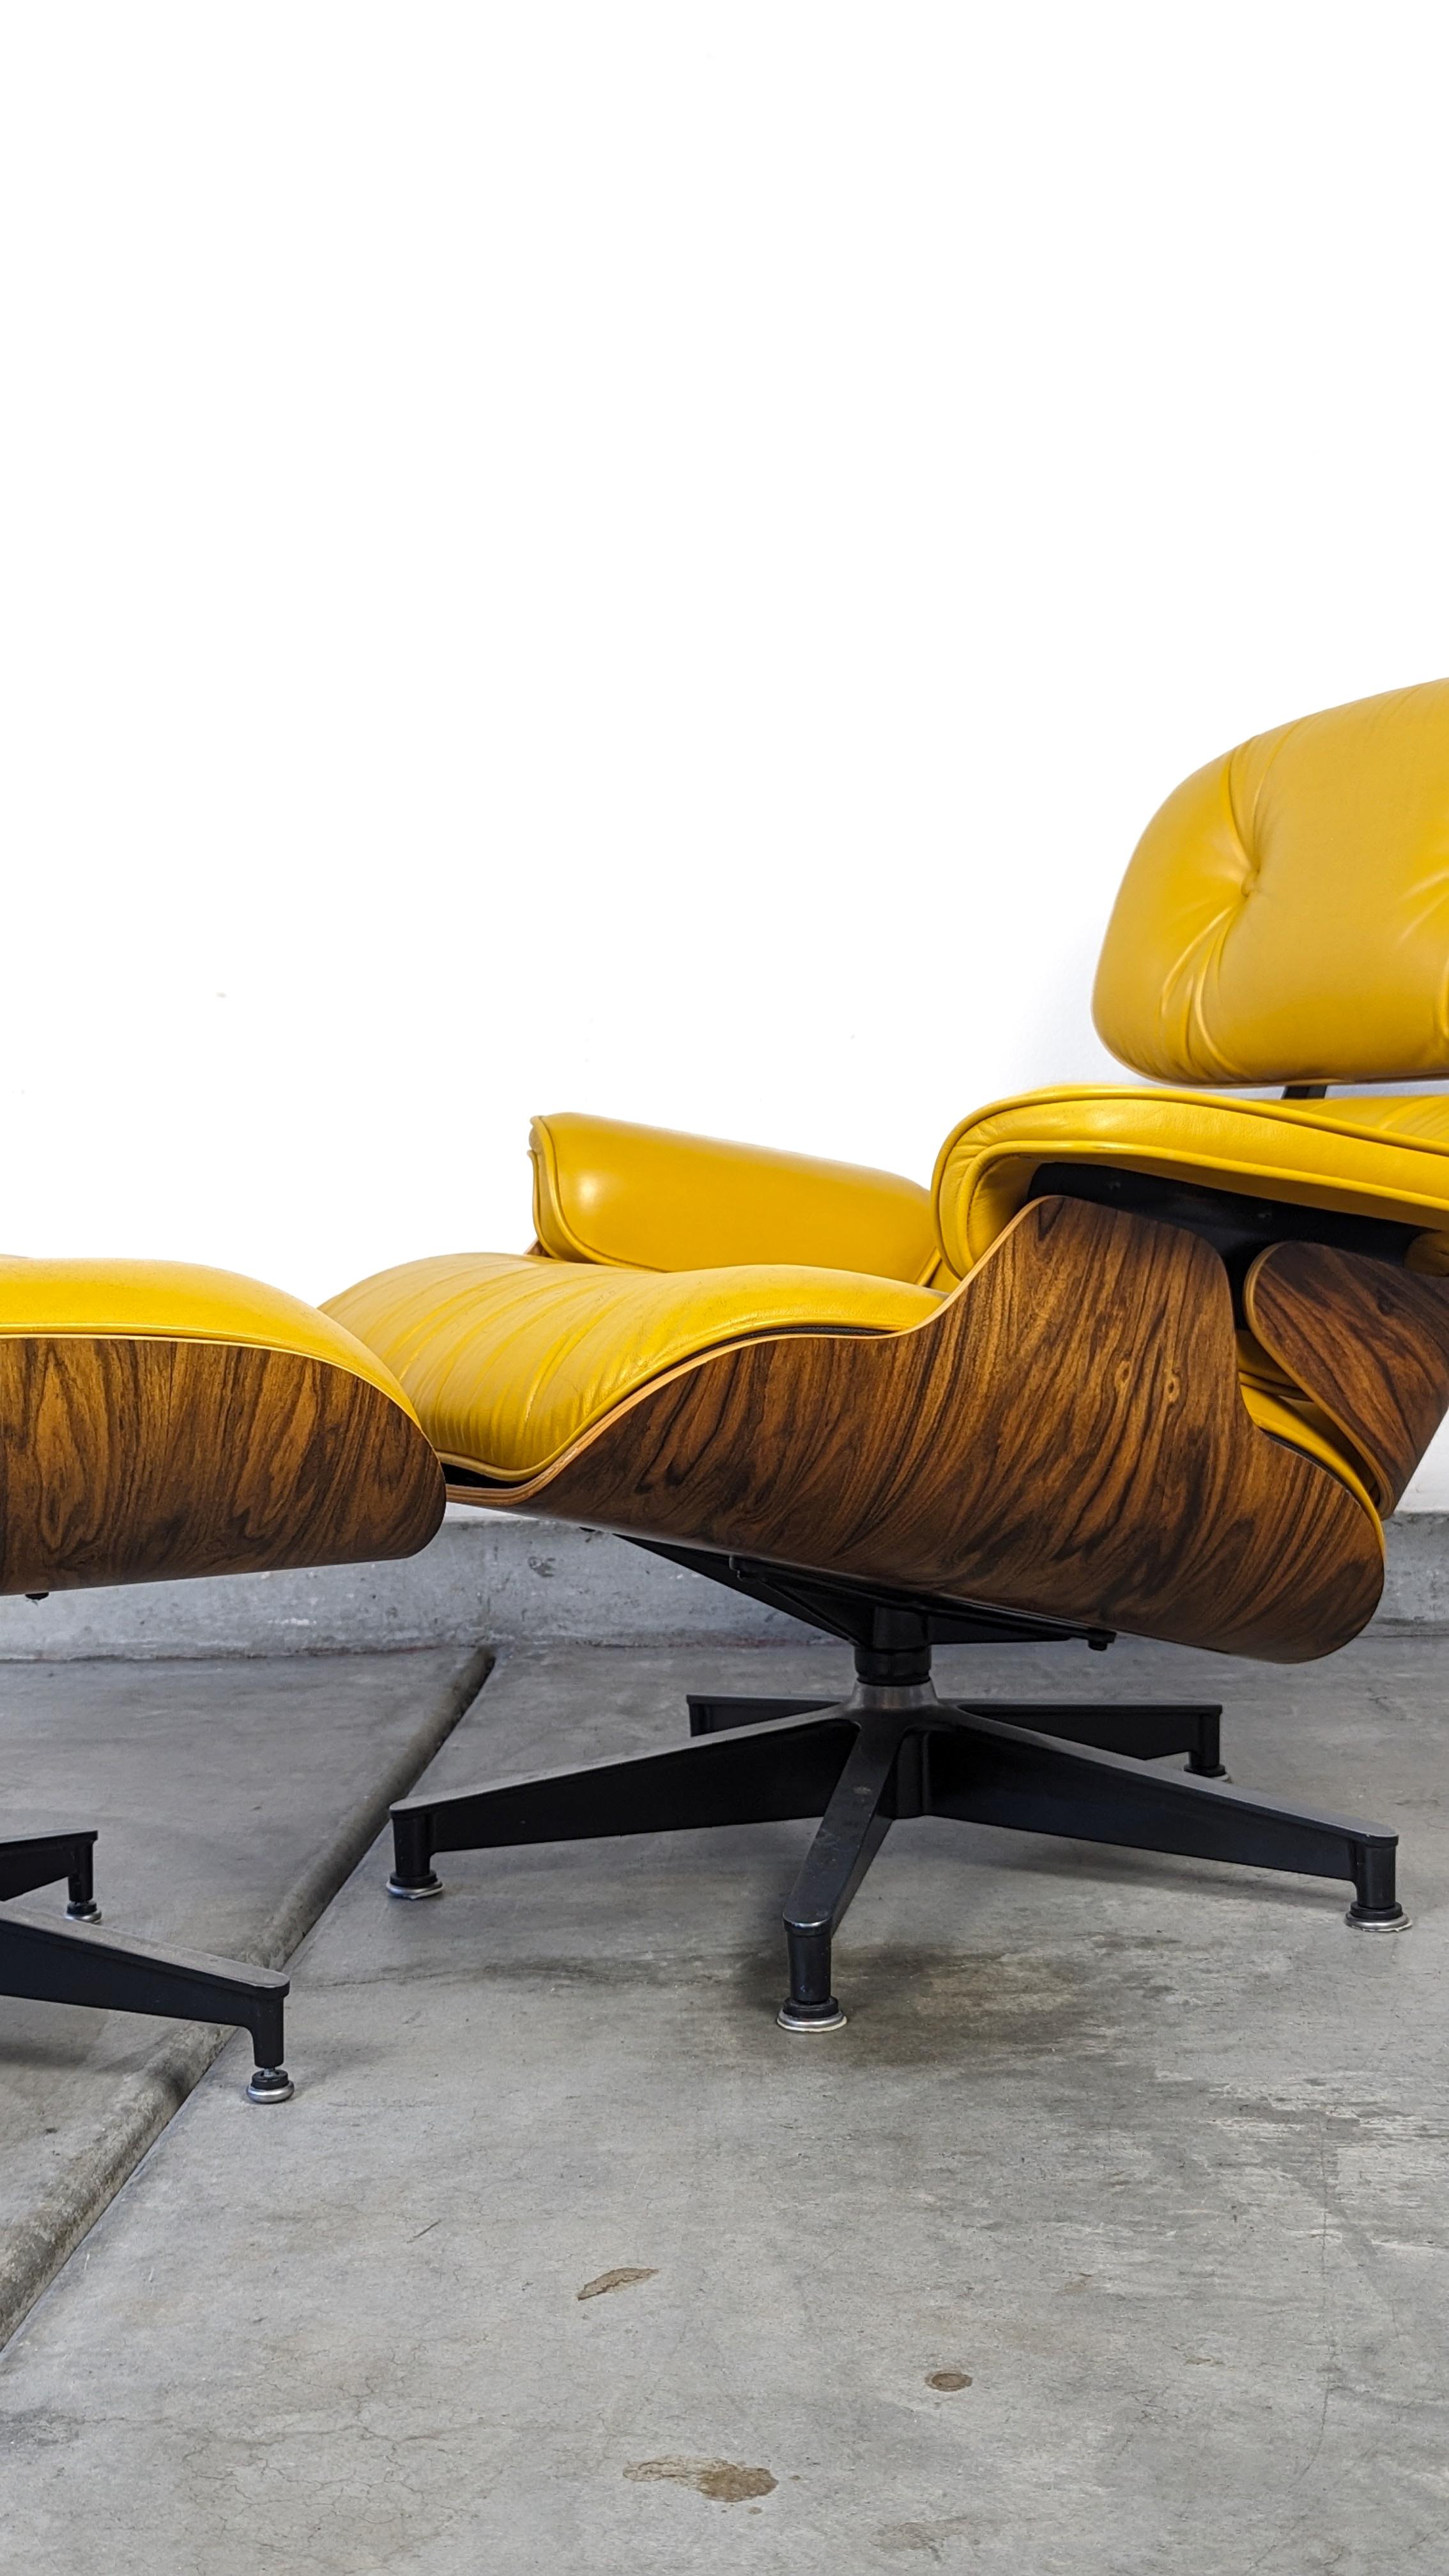 Step into a realm of timeless elegance and distinctive style with this iconic Eames Lounge Chair & Ottoman (670 & 671), crafted with precision for Herman Miller in 2008. This exquisite set diverges from the conventional with its vibrant yellow